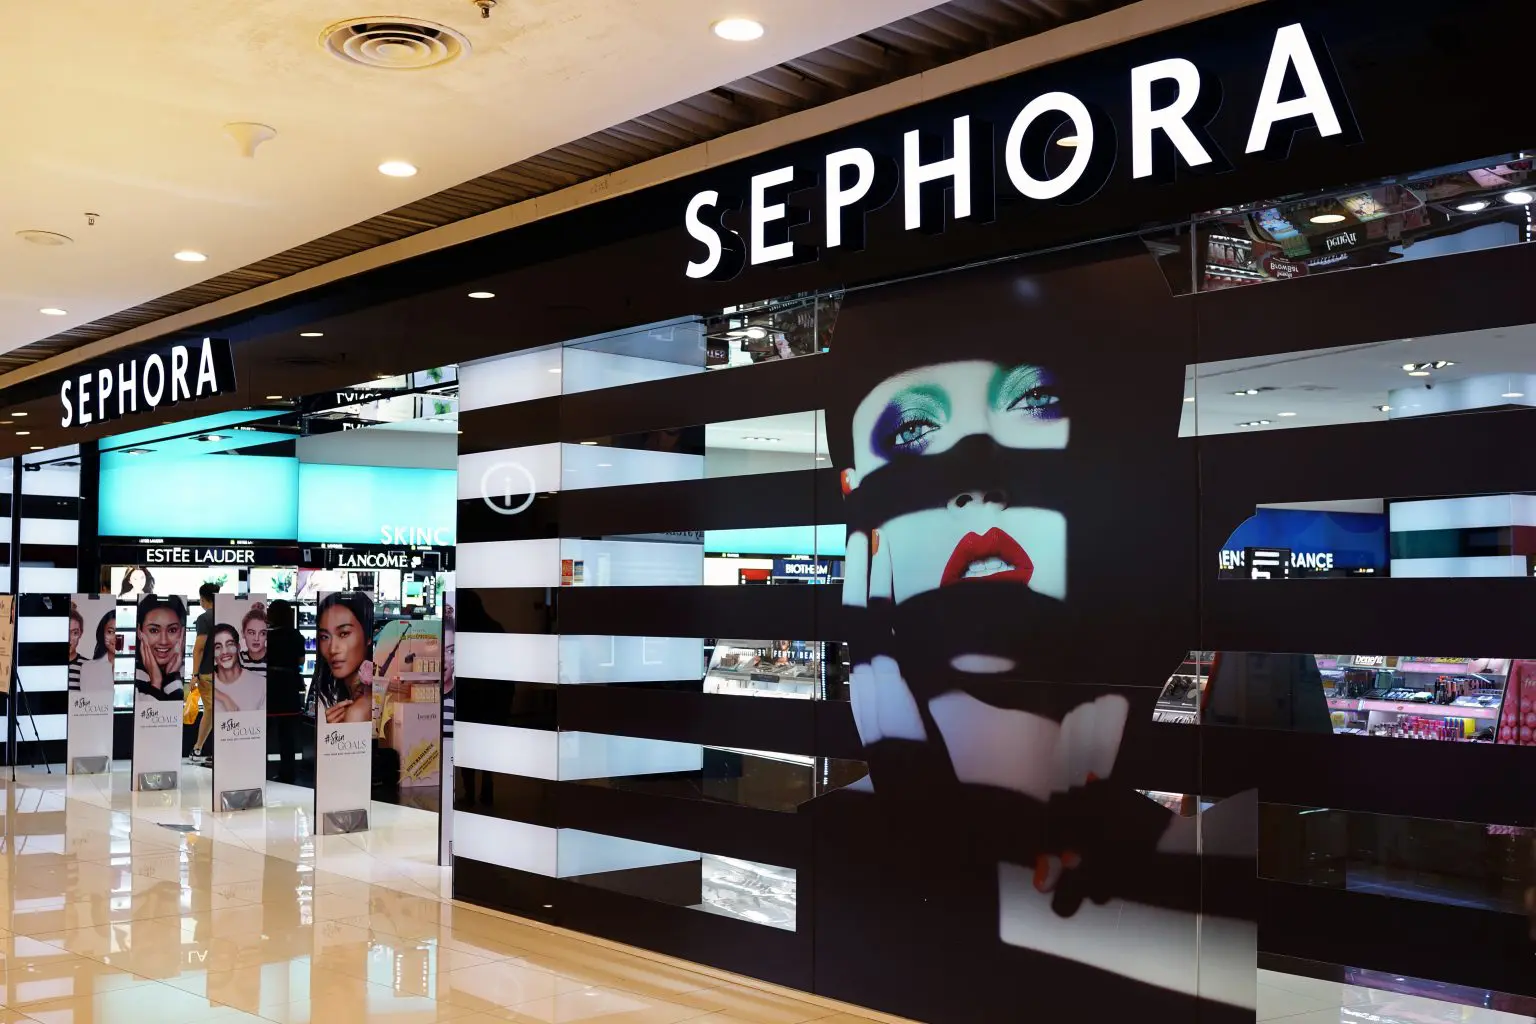 How To Redeem Sephora Gift Card Online 2022